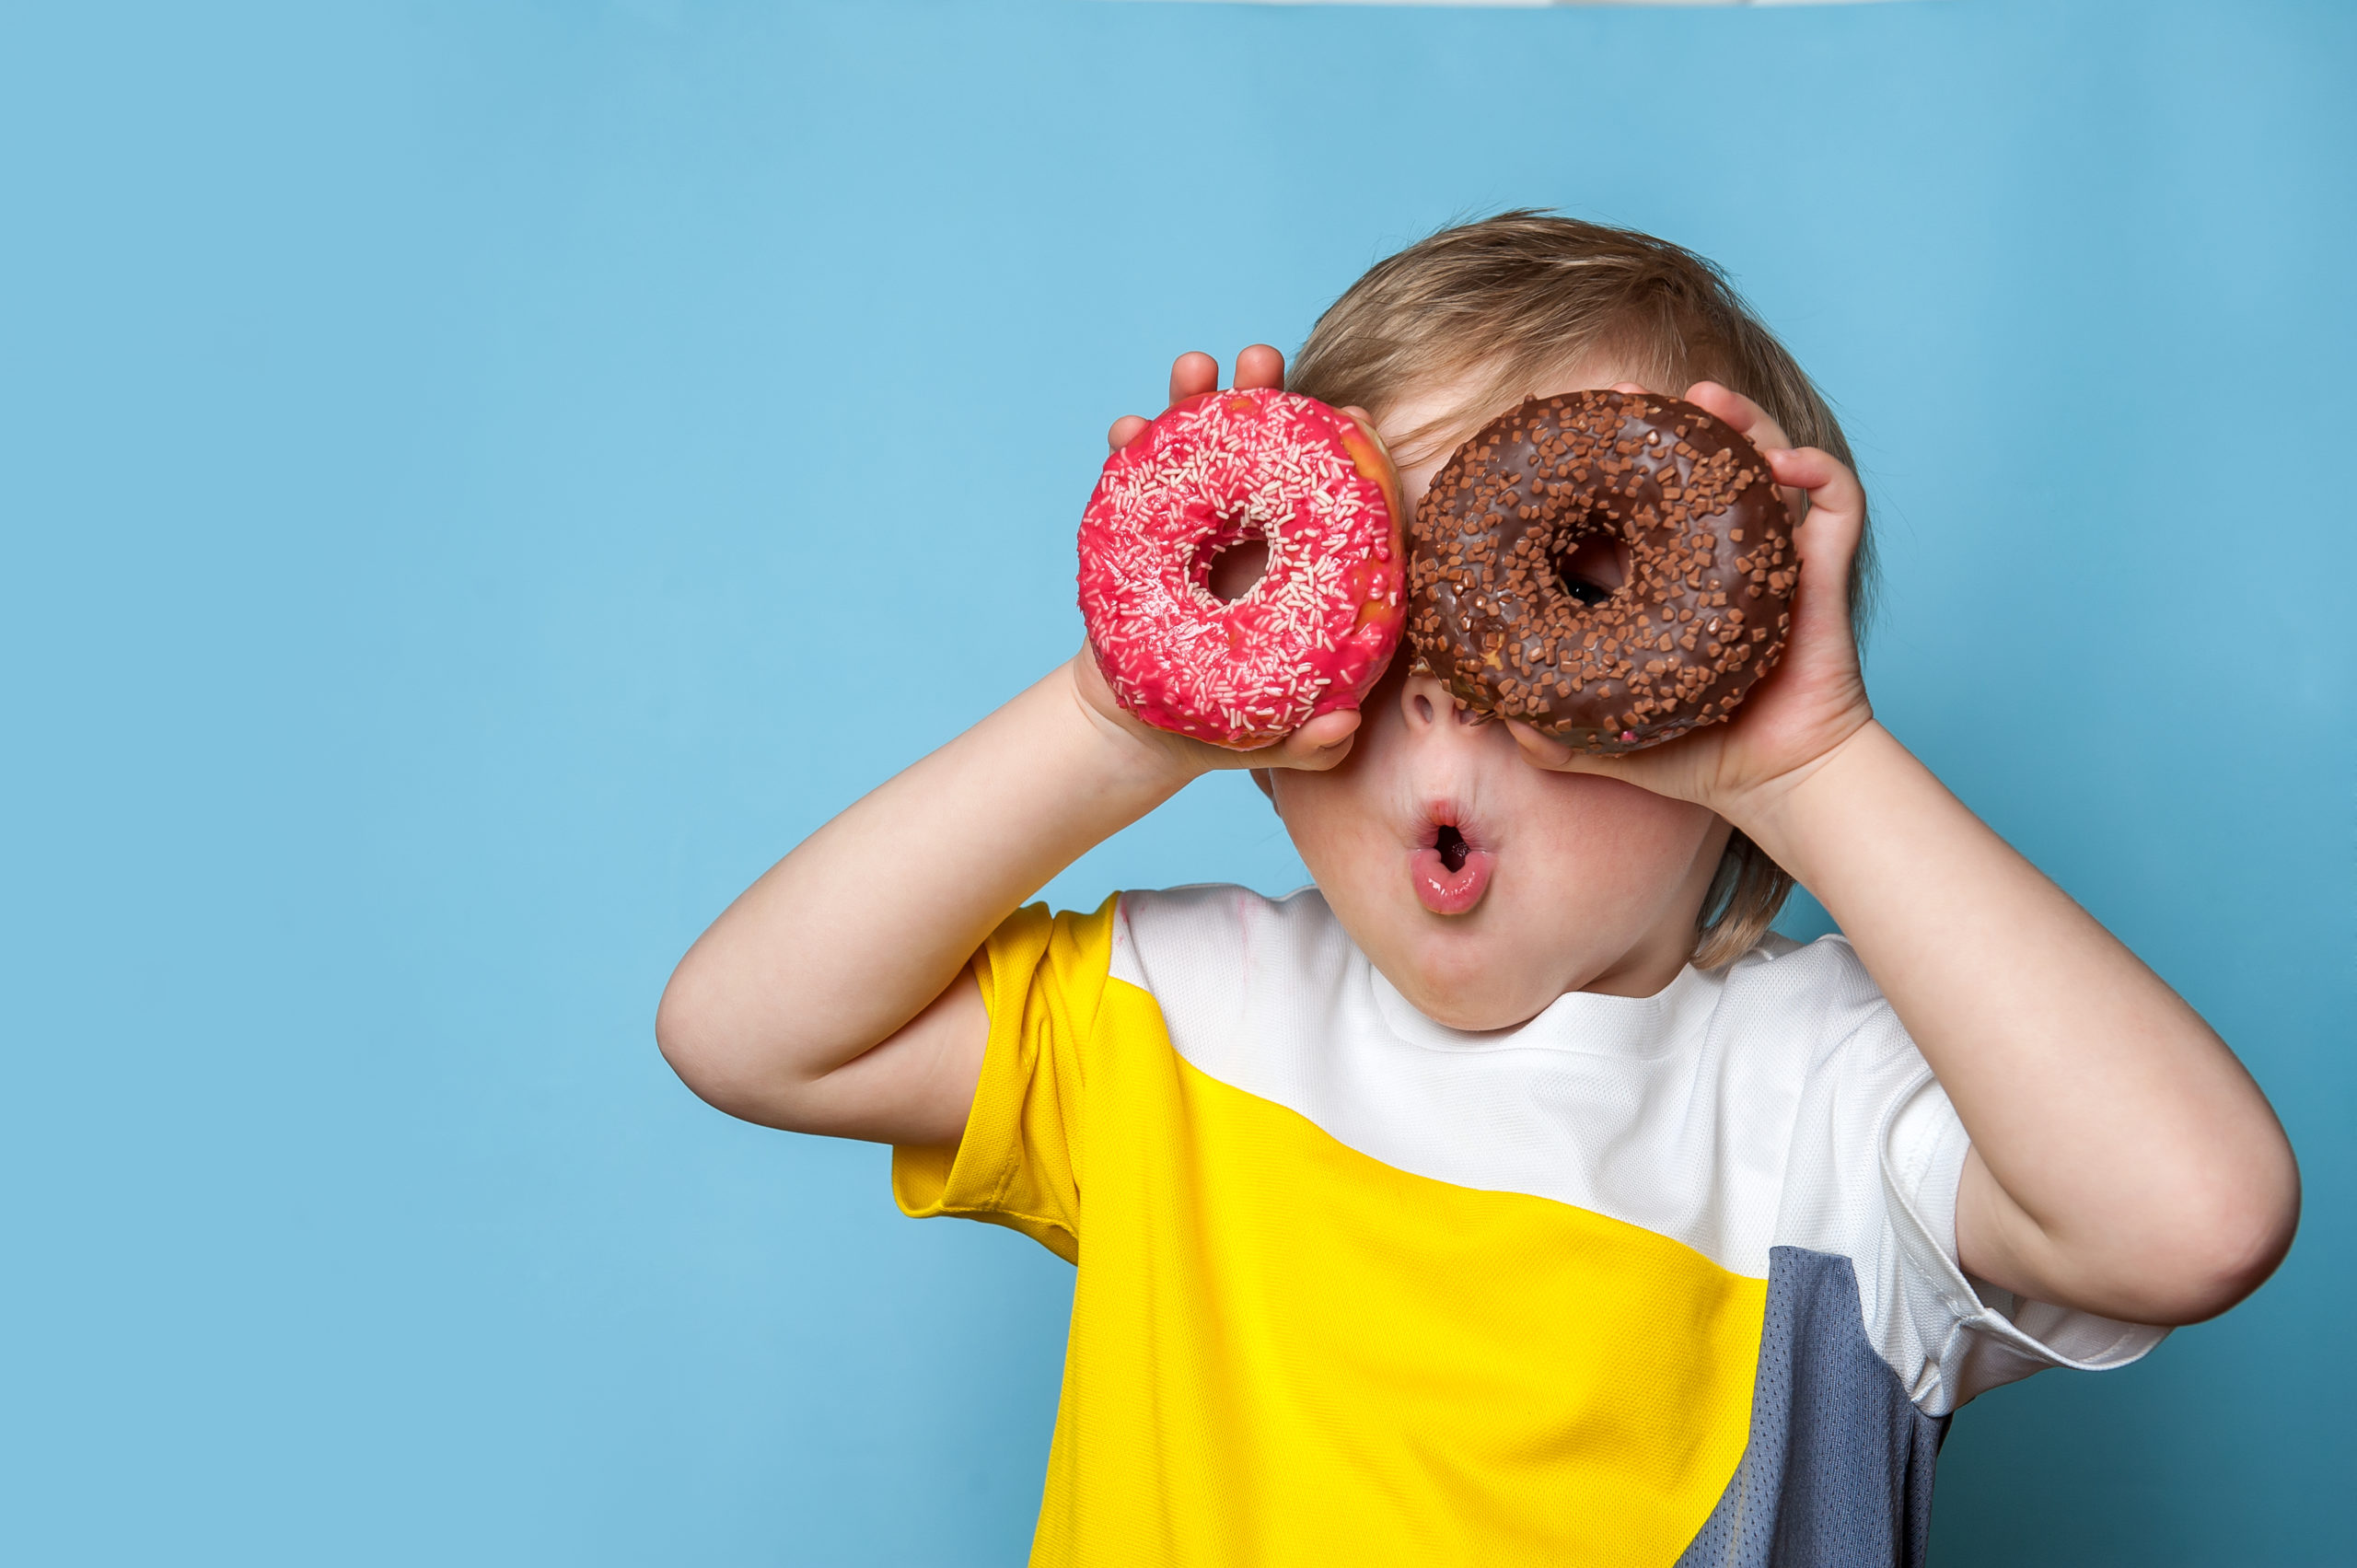 Children love their lockdown treats but a hardline approach to obesity will fail